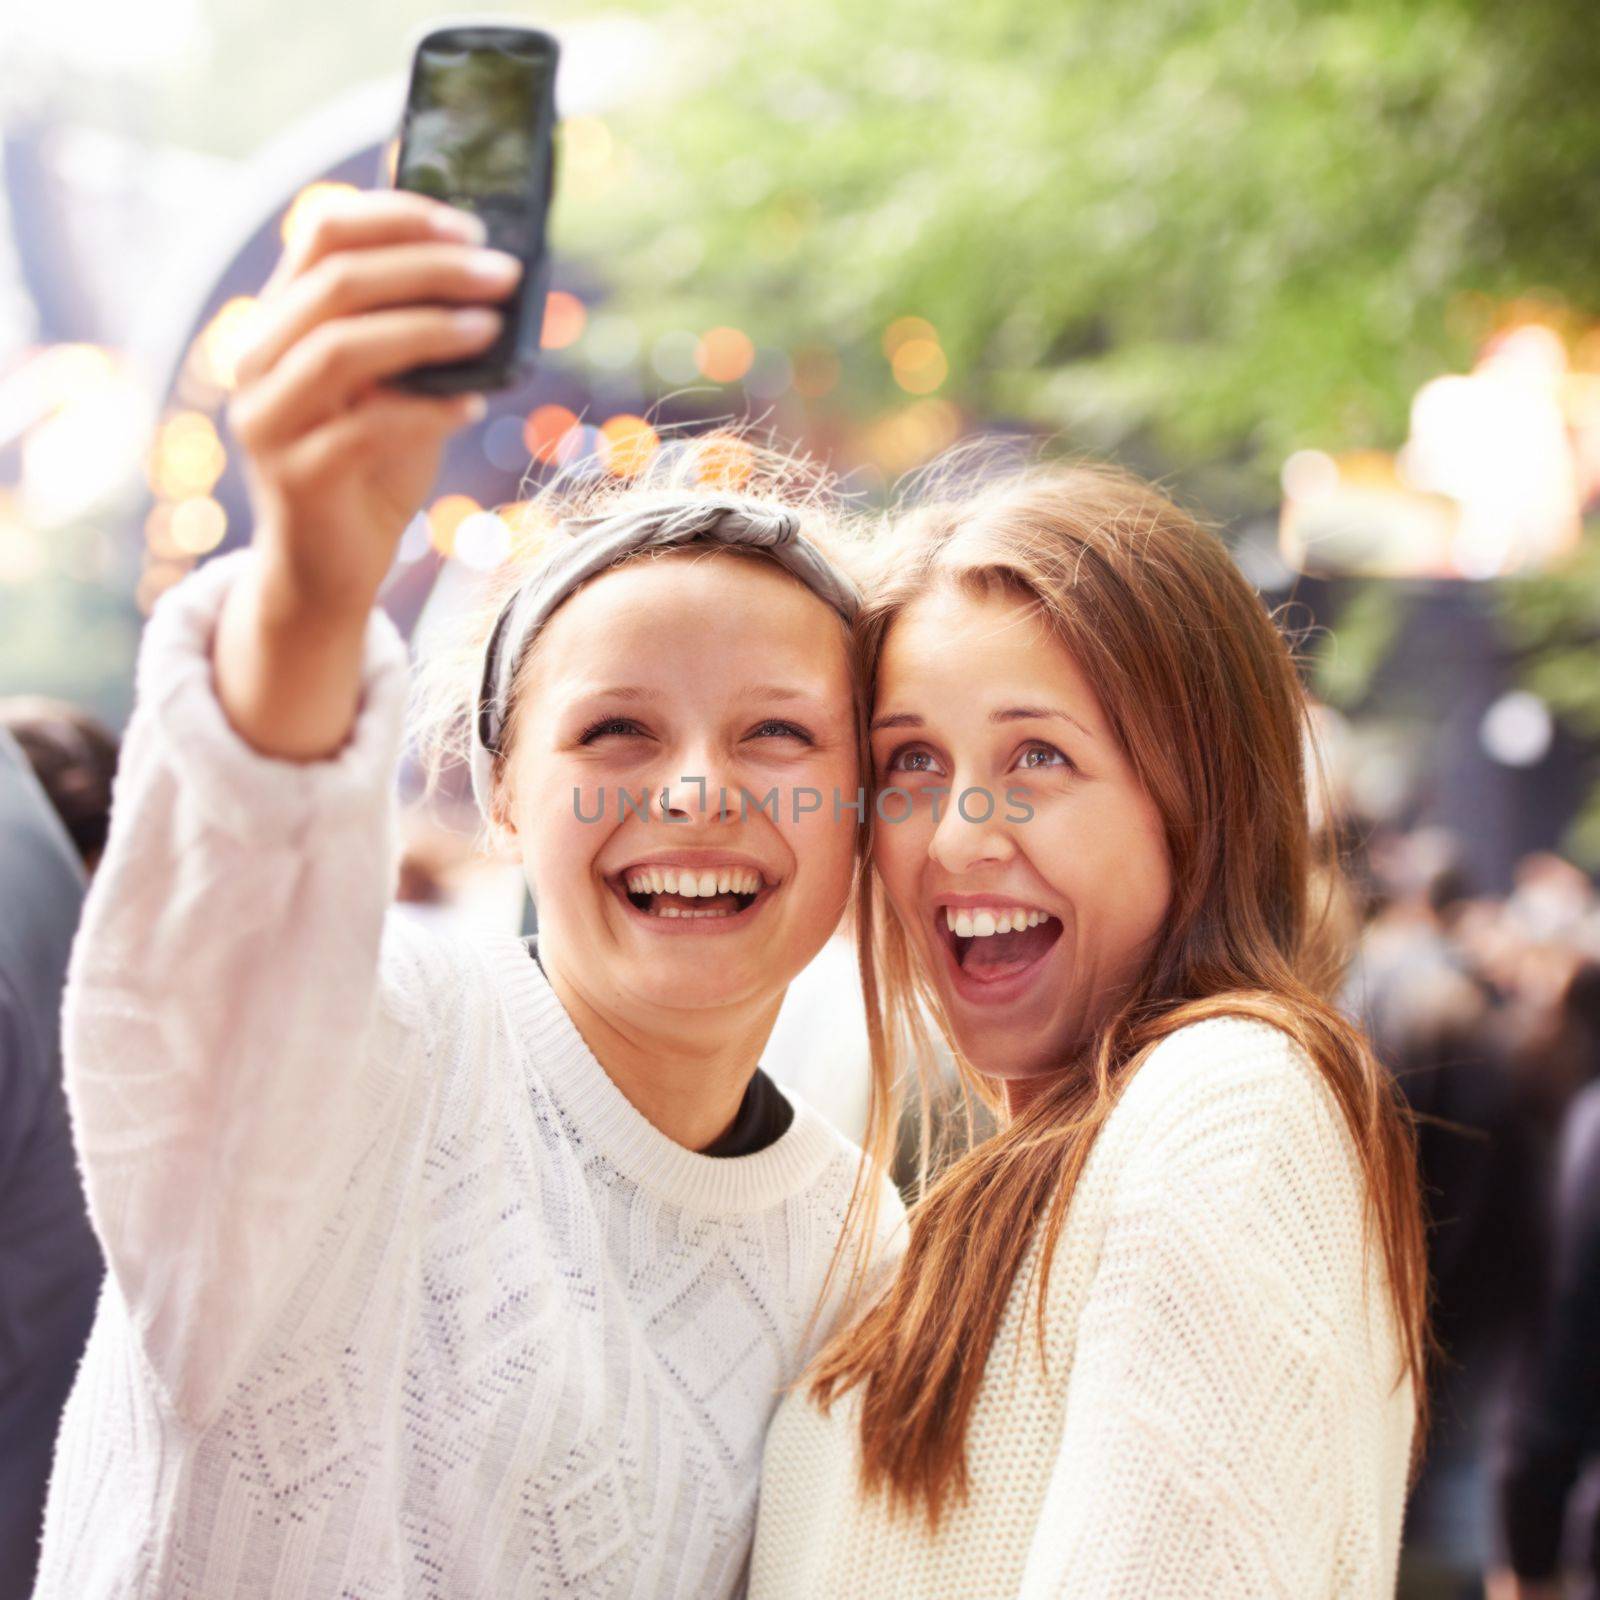 Selfies of celebration. two female friends taking a selfie at an outdoor festival